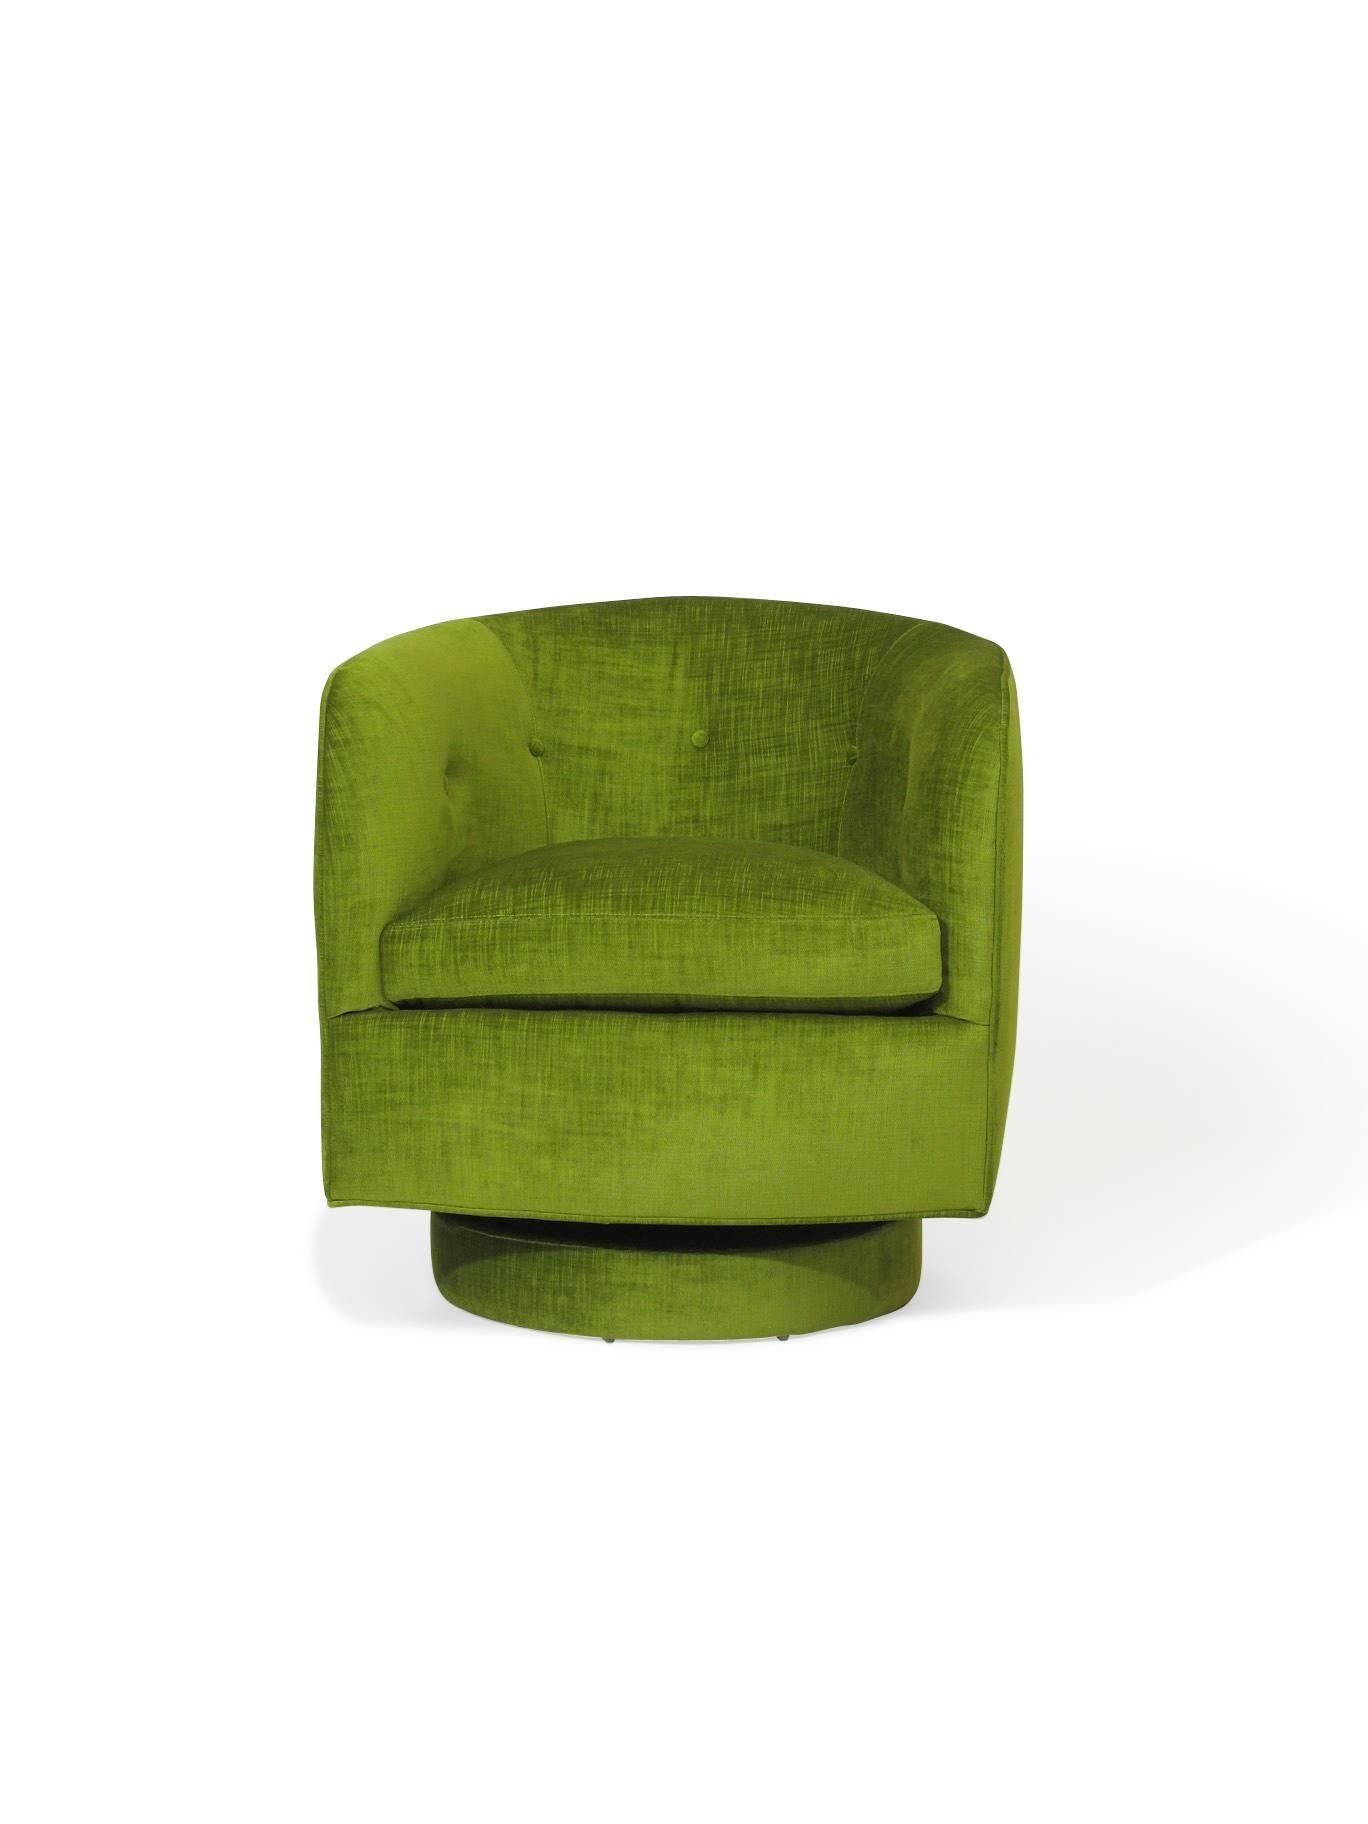 Lounge chair designed in 1965 by Milo Baughman for Thayer Coggin upholstered in high quality green velvet. Lounge chair swivels in a 360, and also tilts back and forth for a very comfortable seating experience. This is an exceptional lounge chair